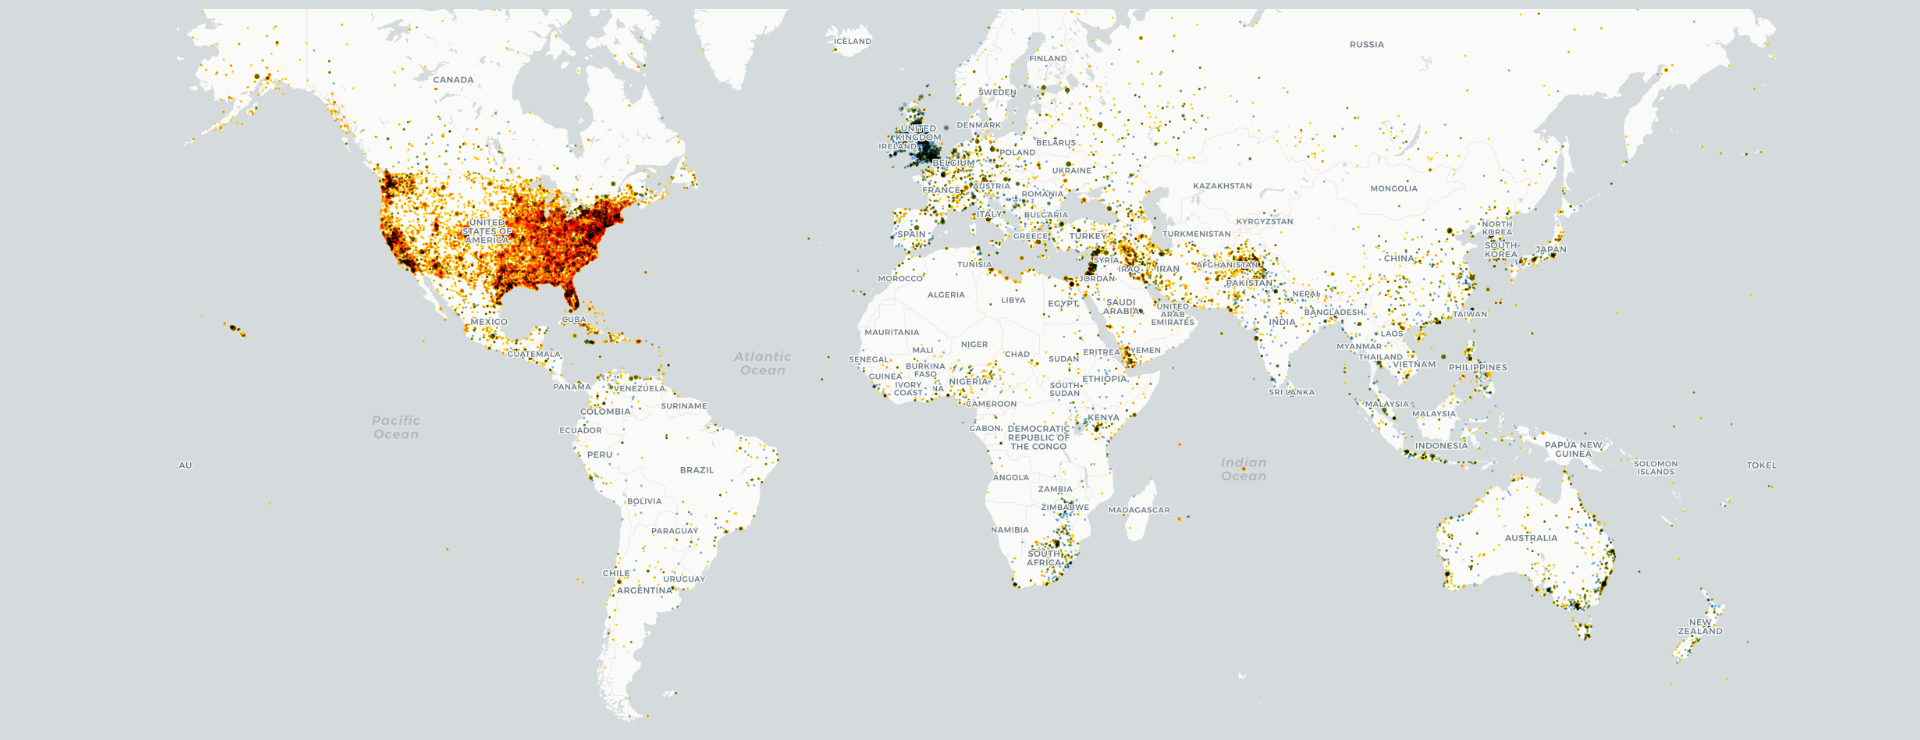 Visualizing the Geography of TV Stations